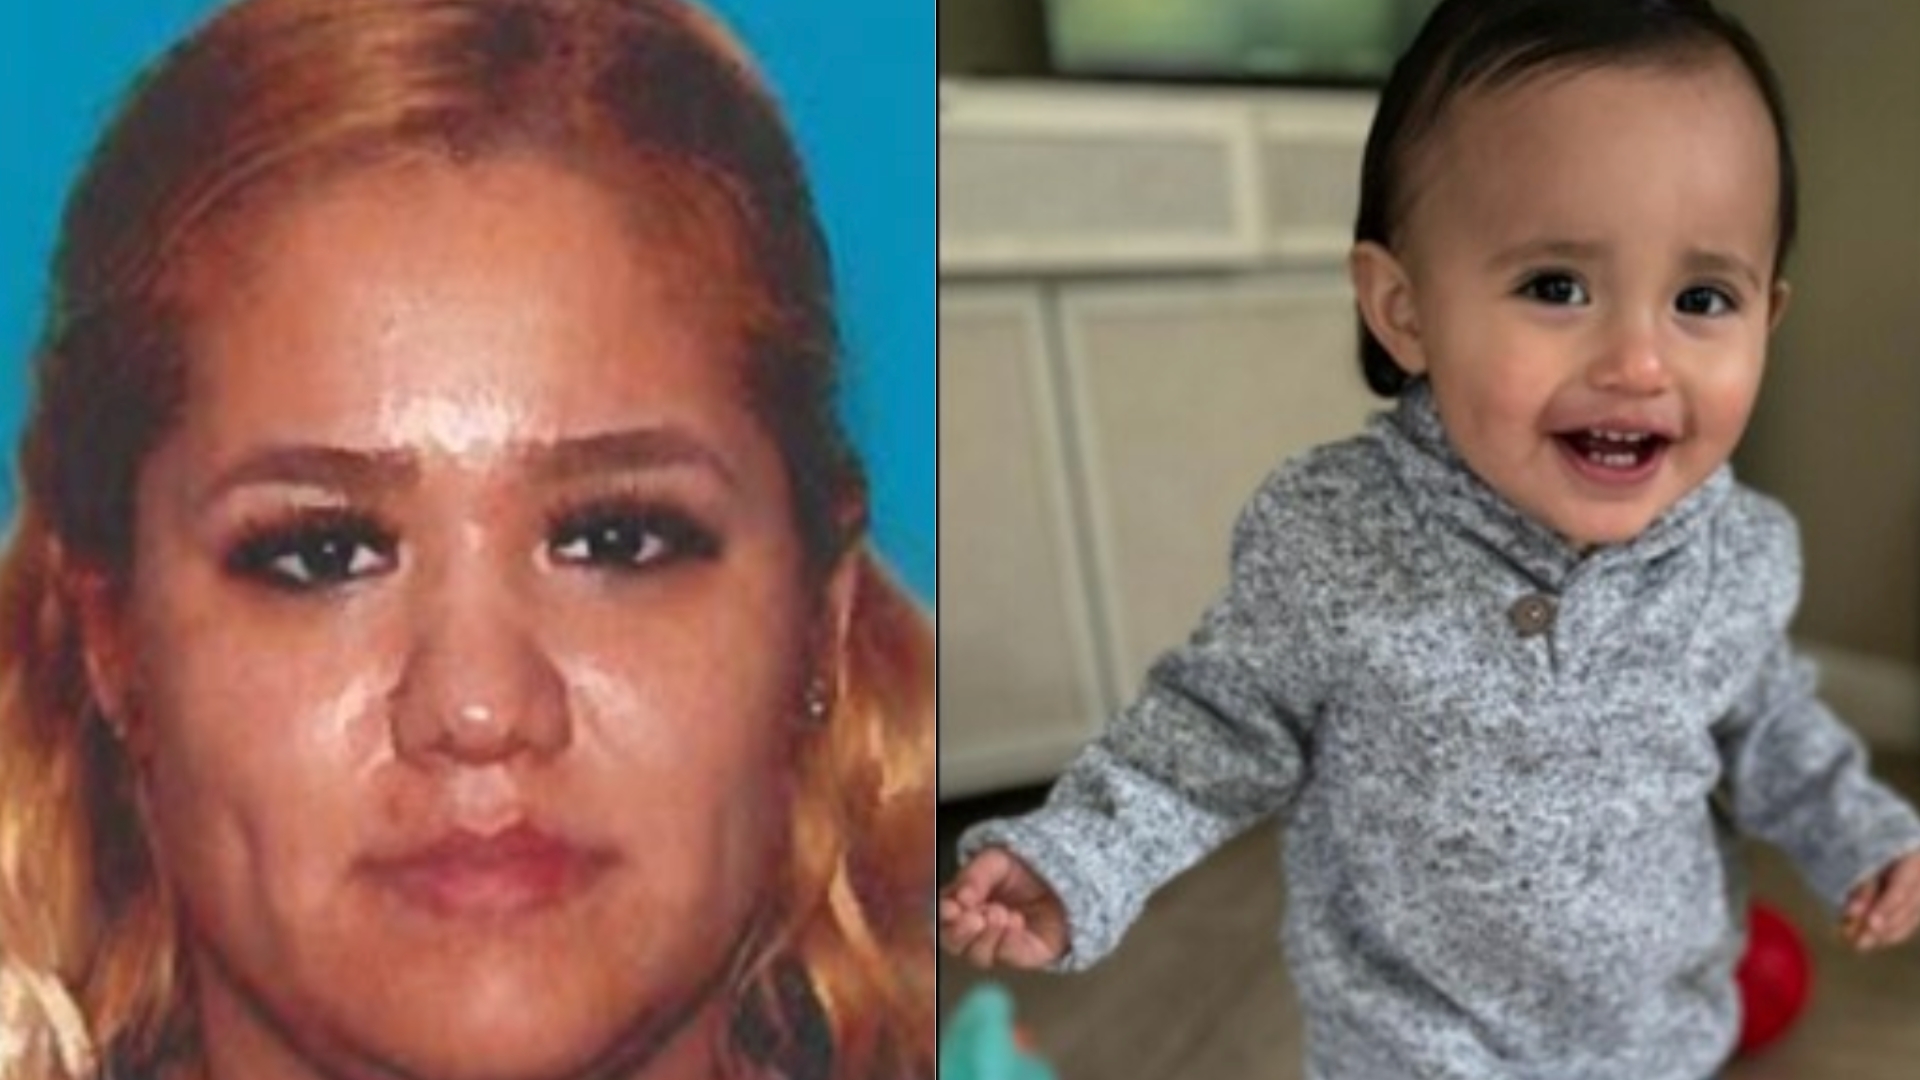 Brigette Benitez, 31, and Miguel Eduardo Medina, 15 months old, in photos from the Los Angeles County Sheriff’s Department.